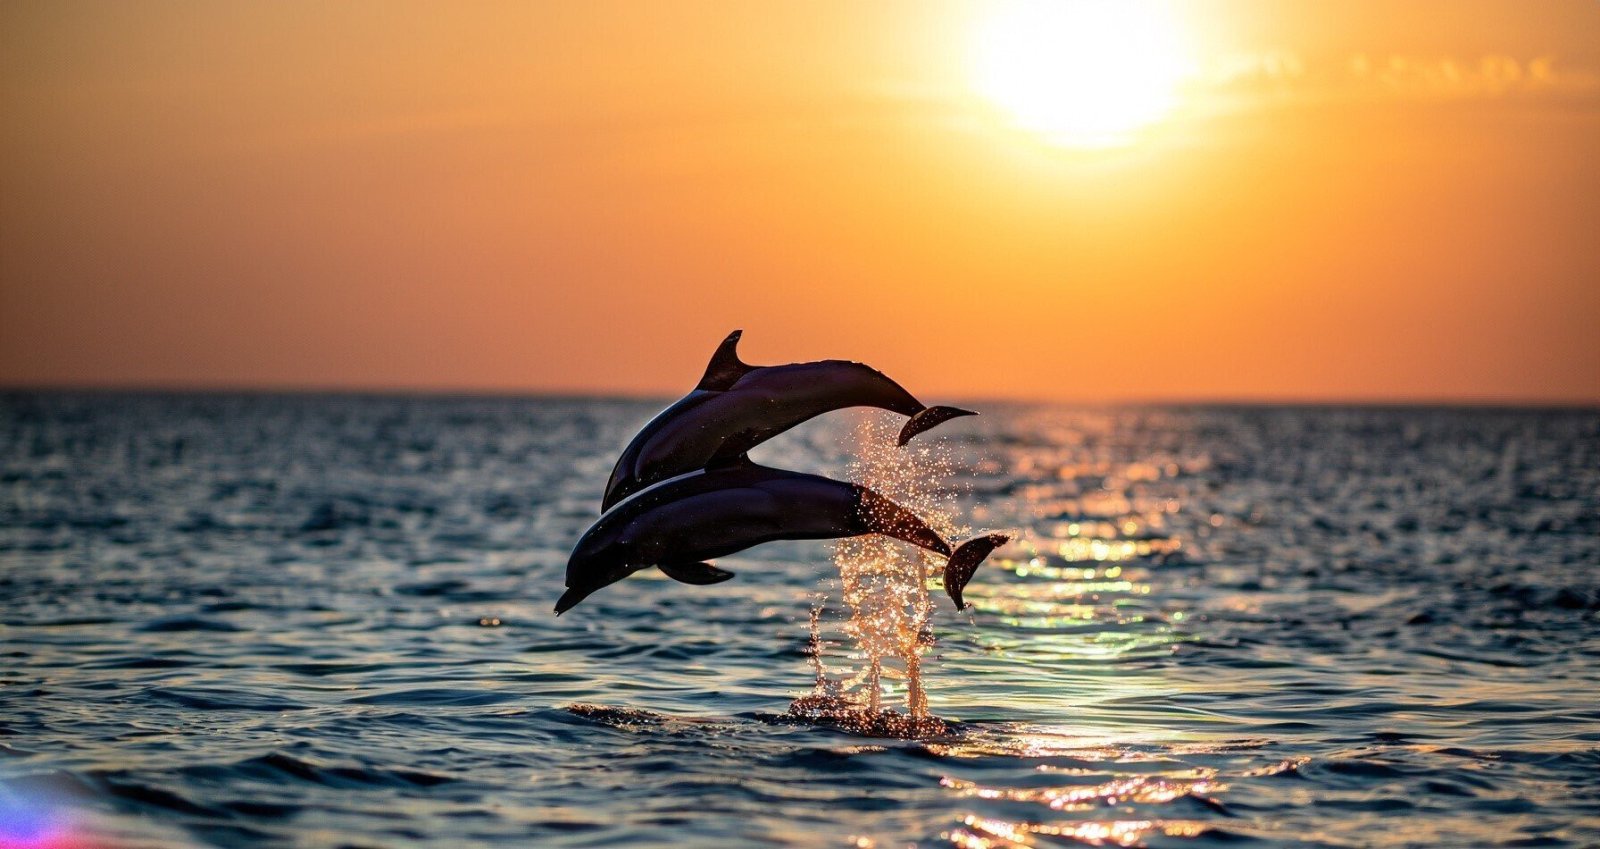 dolphins jumping out of the ocean